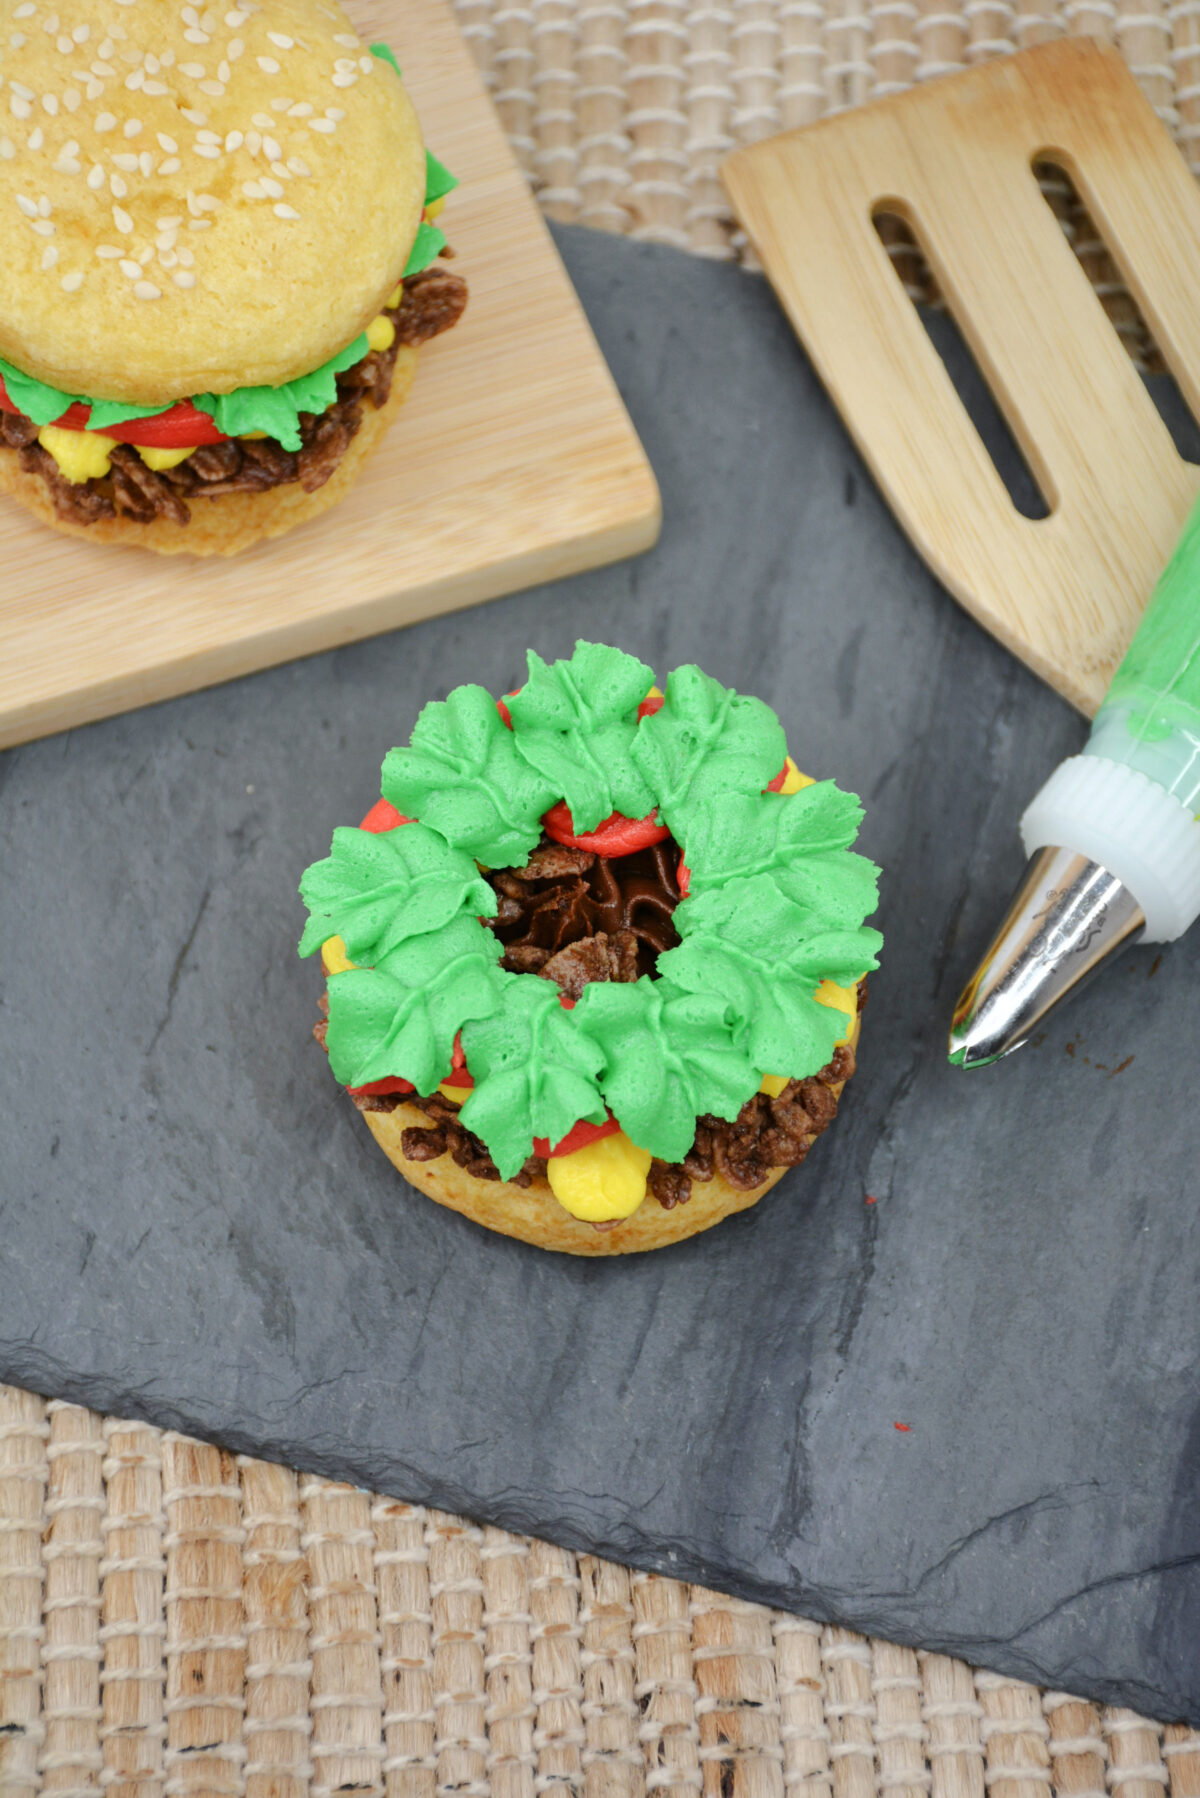 Then piping green leaves with frosting over everything.